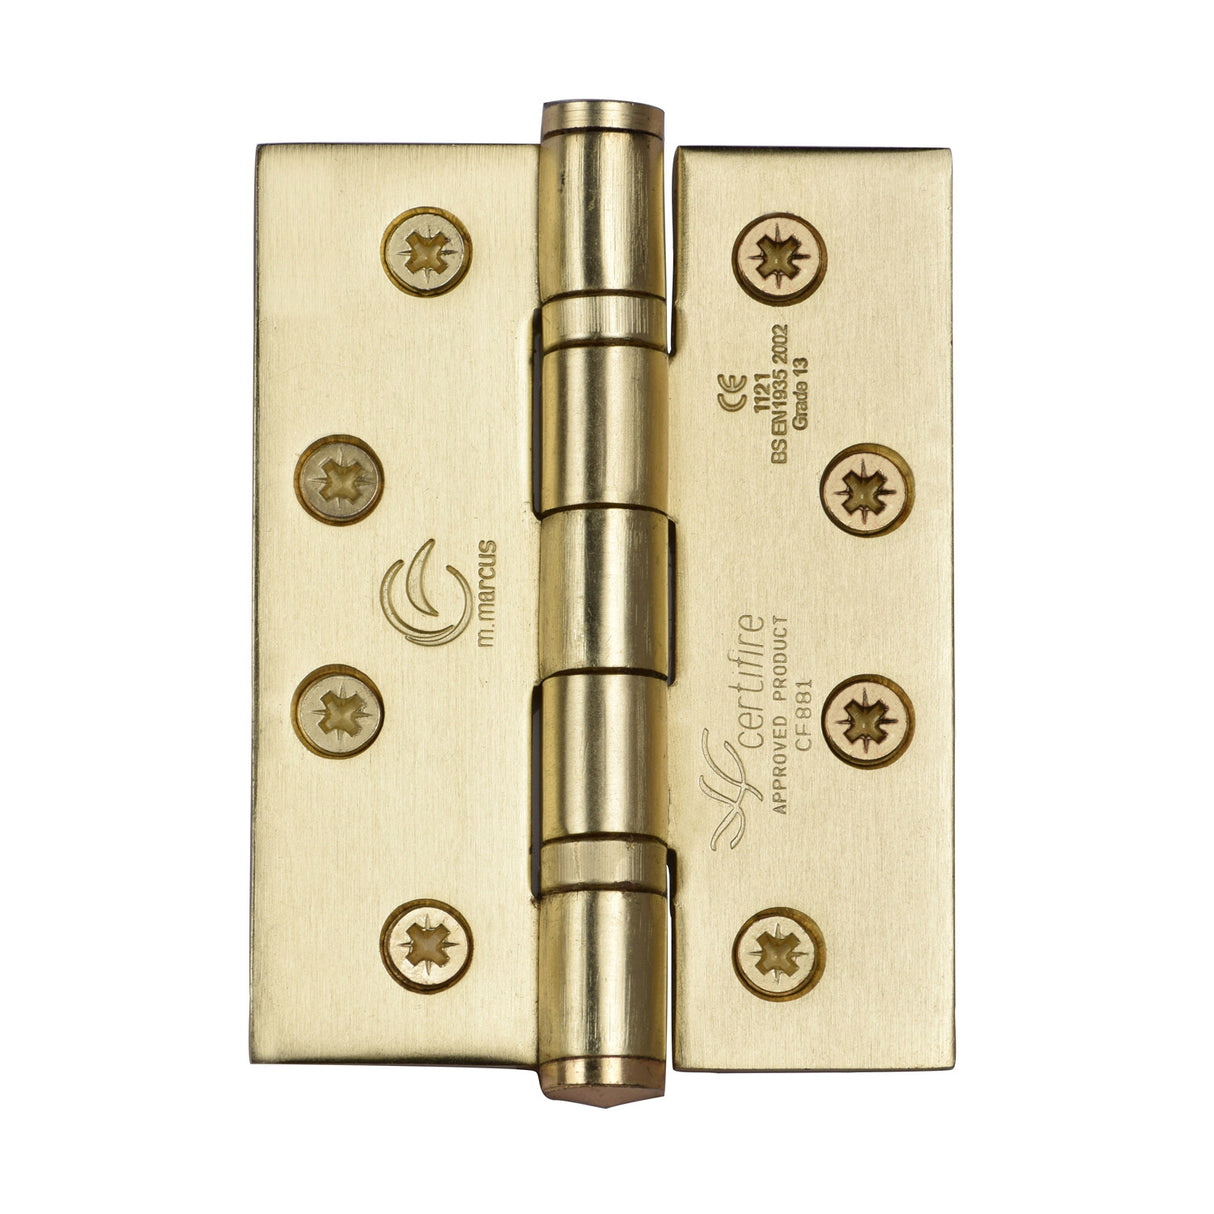 This is an image of a Stainless Steel Line Hinge SS 4 x 3 x 3 Satin Brass finish, ss-4x3-sb that is available to order from Trade Door Handles in Kendal.